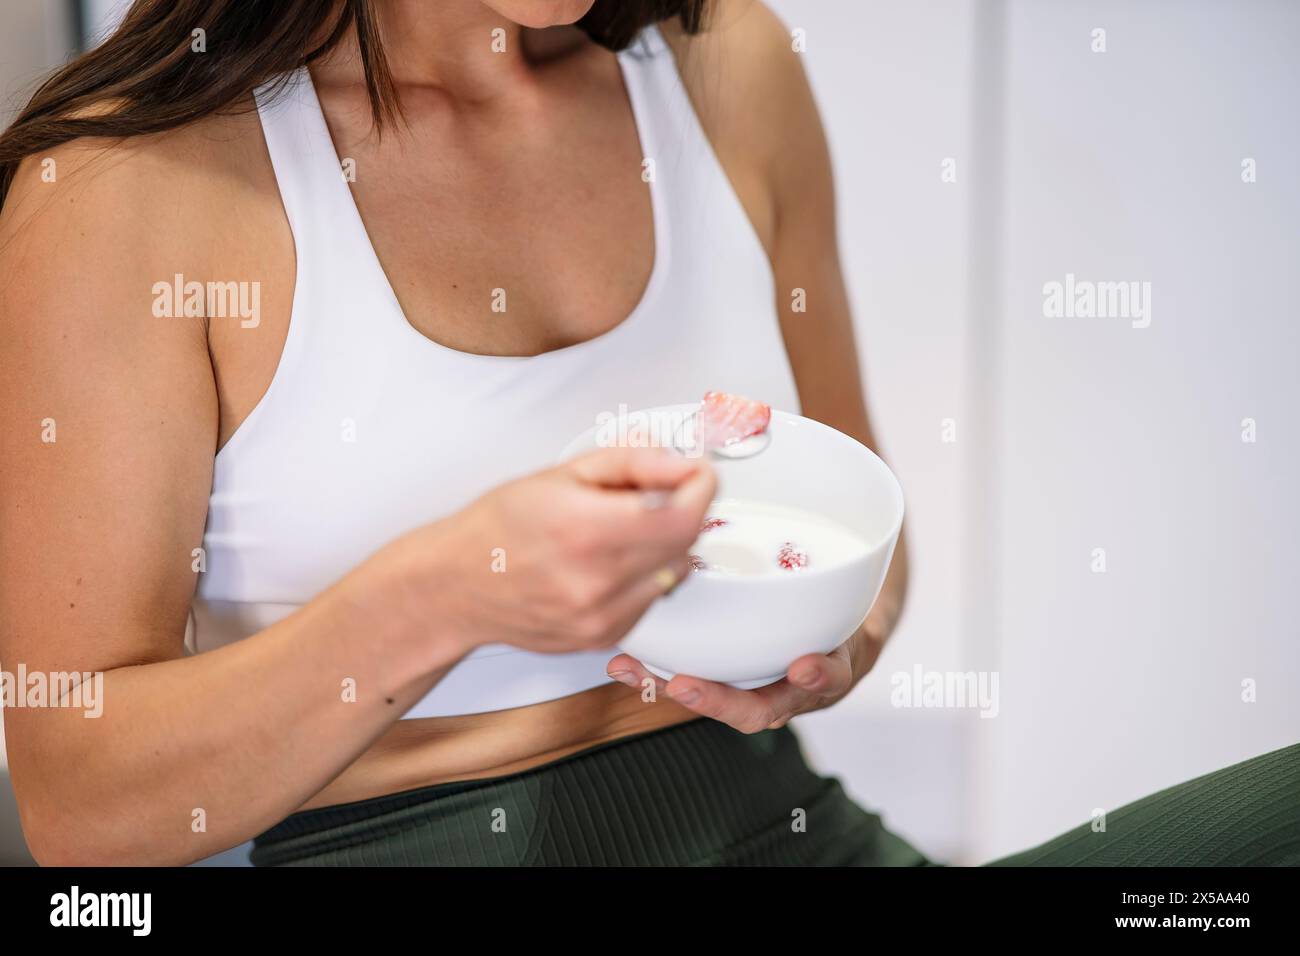 A fit woman in workout attire enjoys a healthy bowl of yogurt with fruit, emphasizing a balanced lifestyle Stock Photo